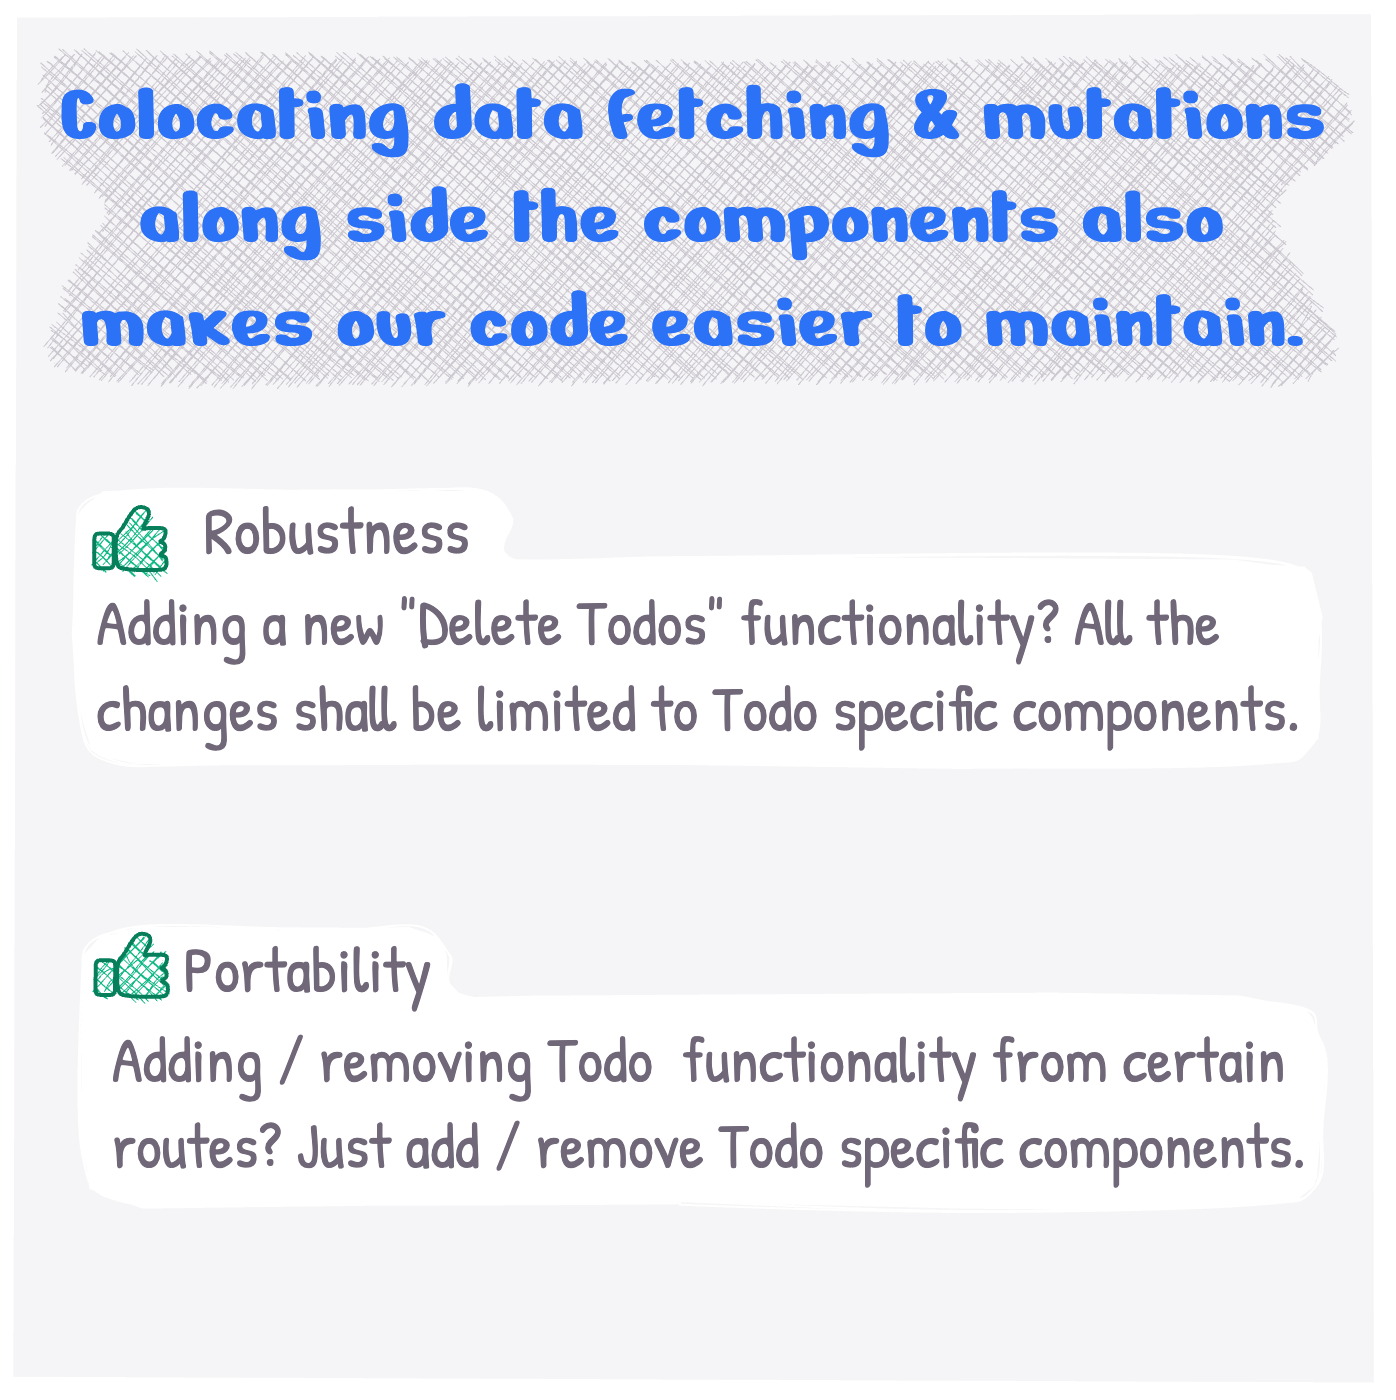 Colocating data fetching & mutations with components also makes our code easier to maintain.